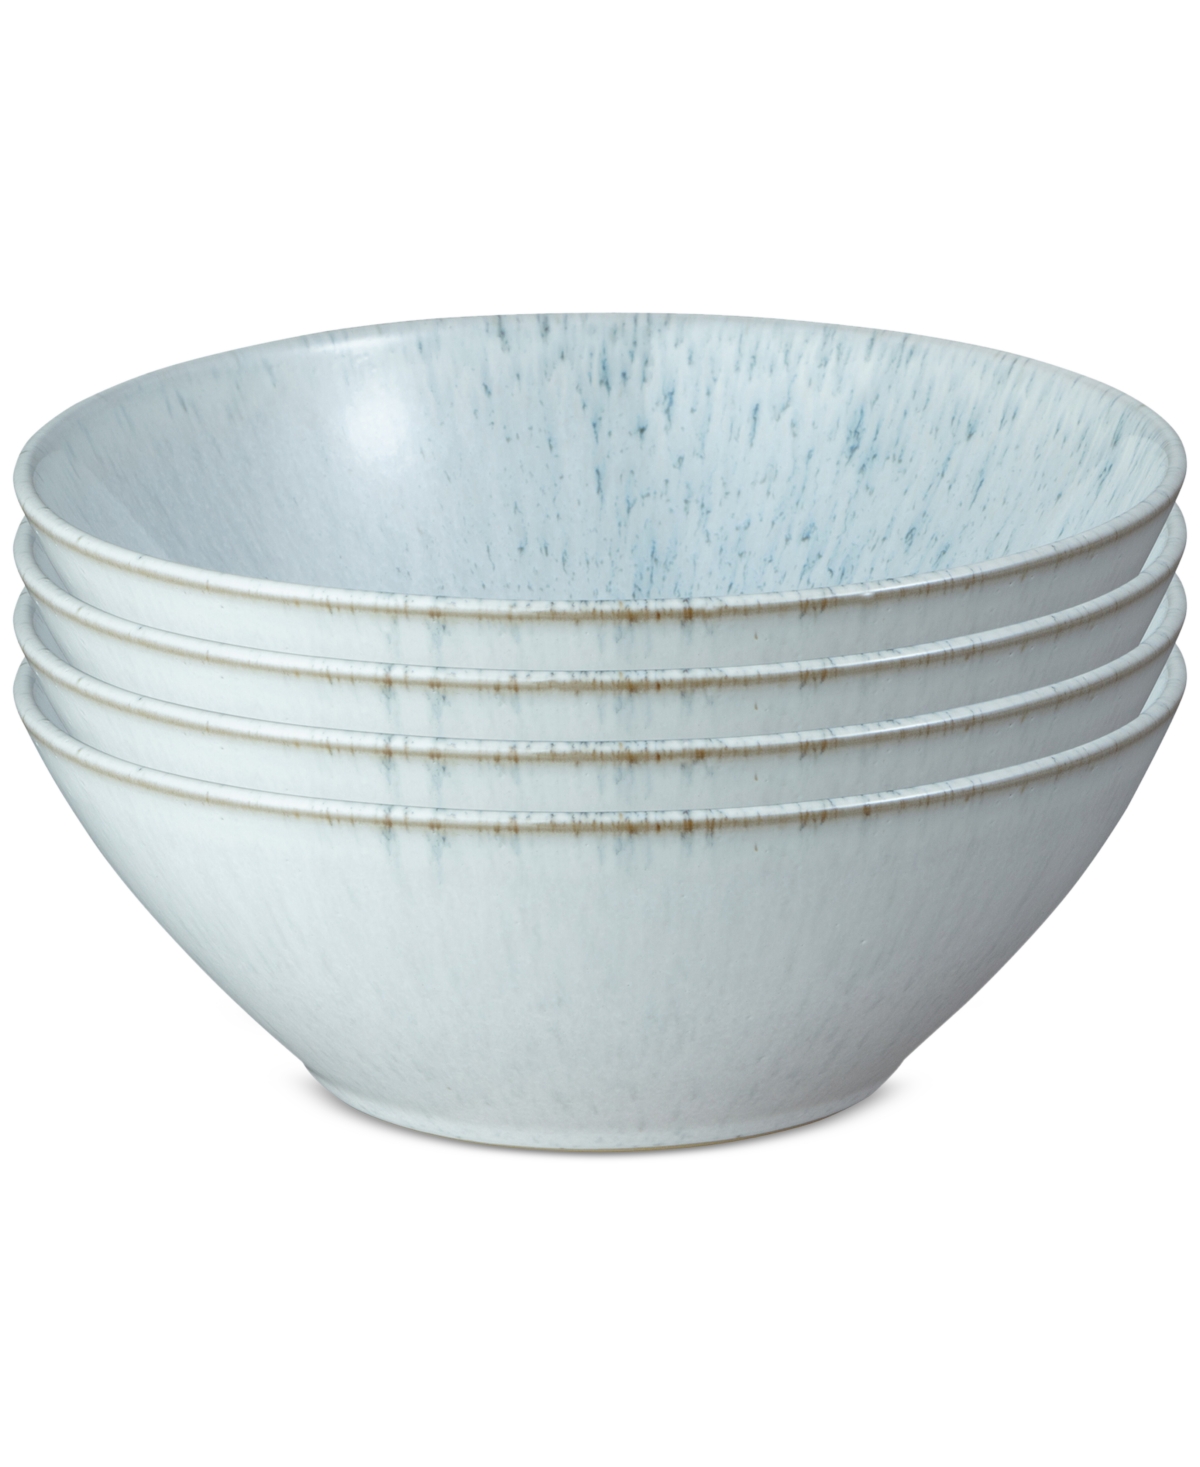 Kiln Collection Stoneware Cereal Bowls, Set Of 4 - Blue